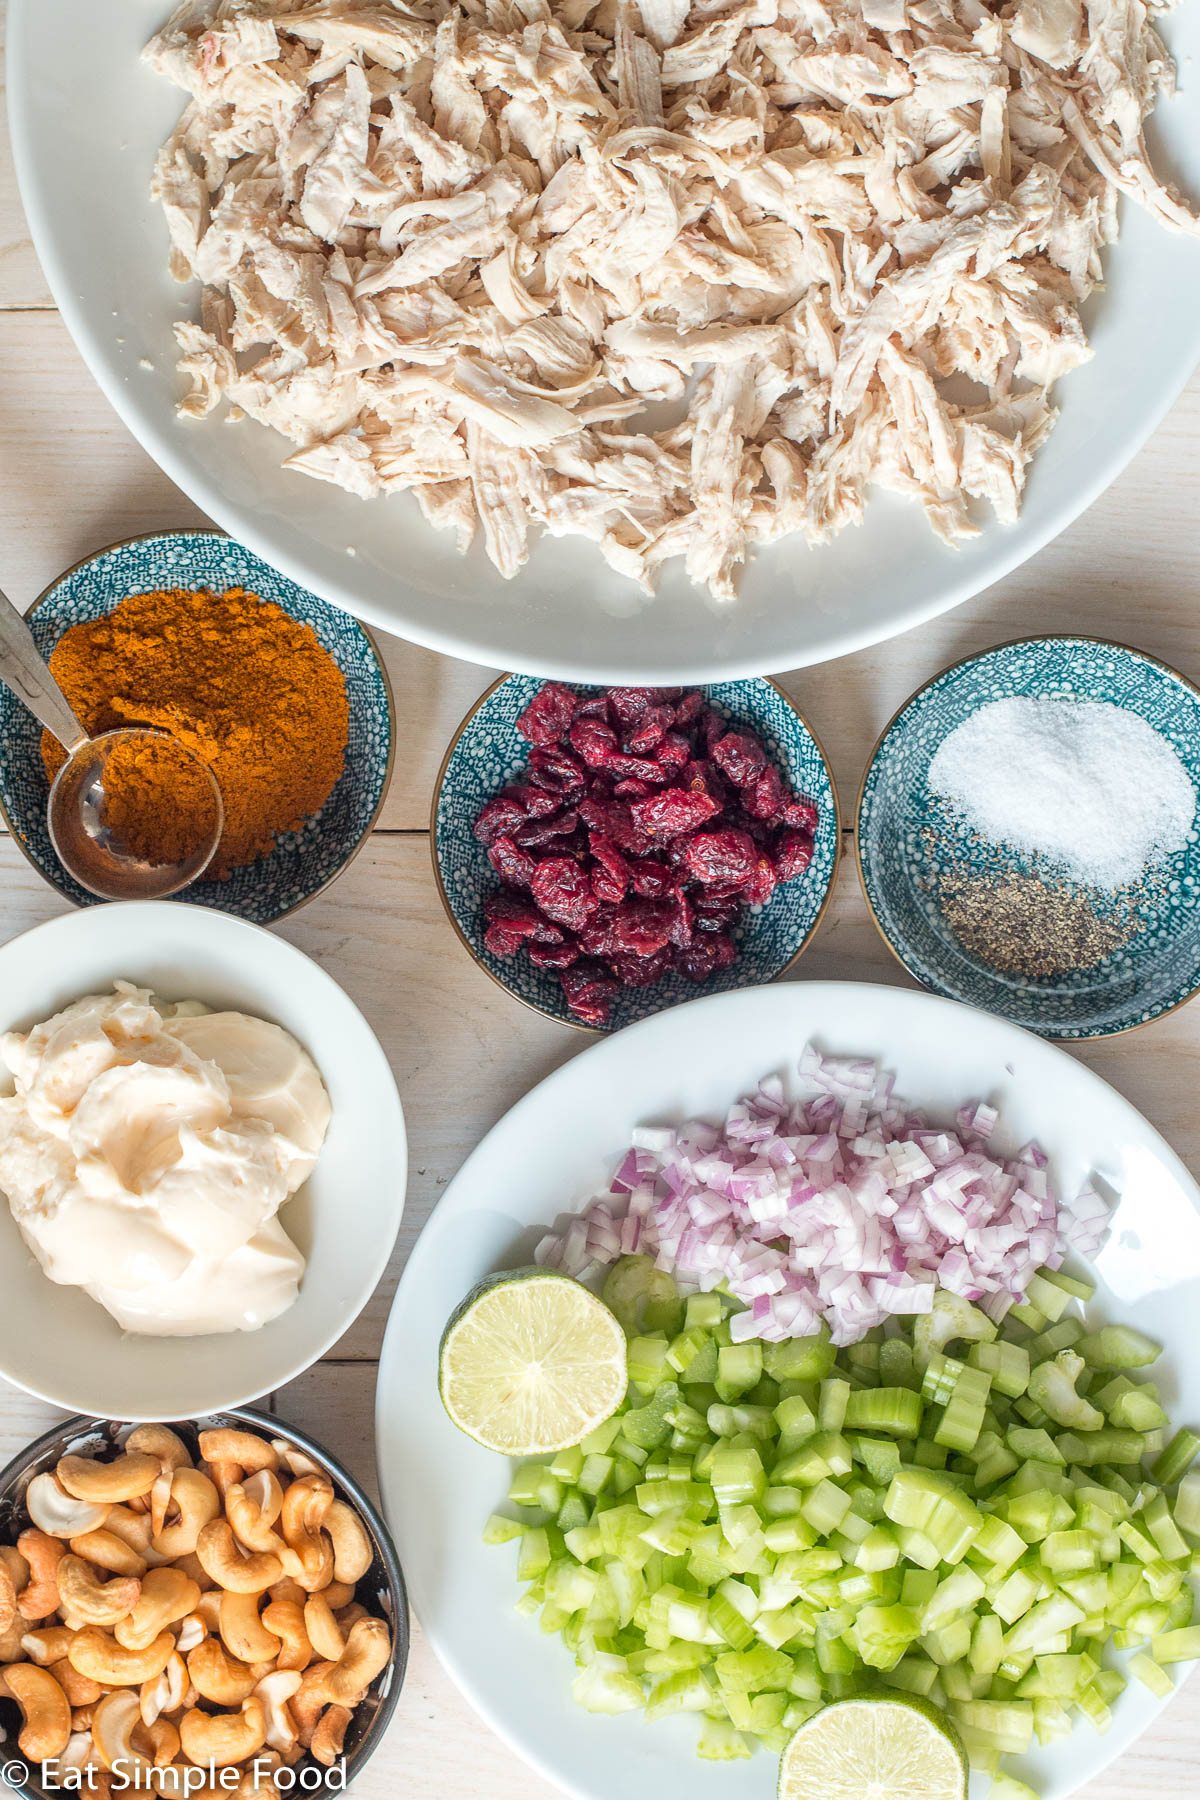 Top view of ingredients: white plate of shredded chicken, bowl of cranberries, bowl of curry powder, bowl of salt and pepper, bowl of mayonnaise, bowl of cashews, plate of diced celery and red onions with a lime cut in half.